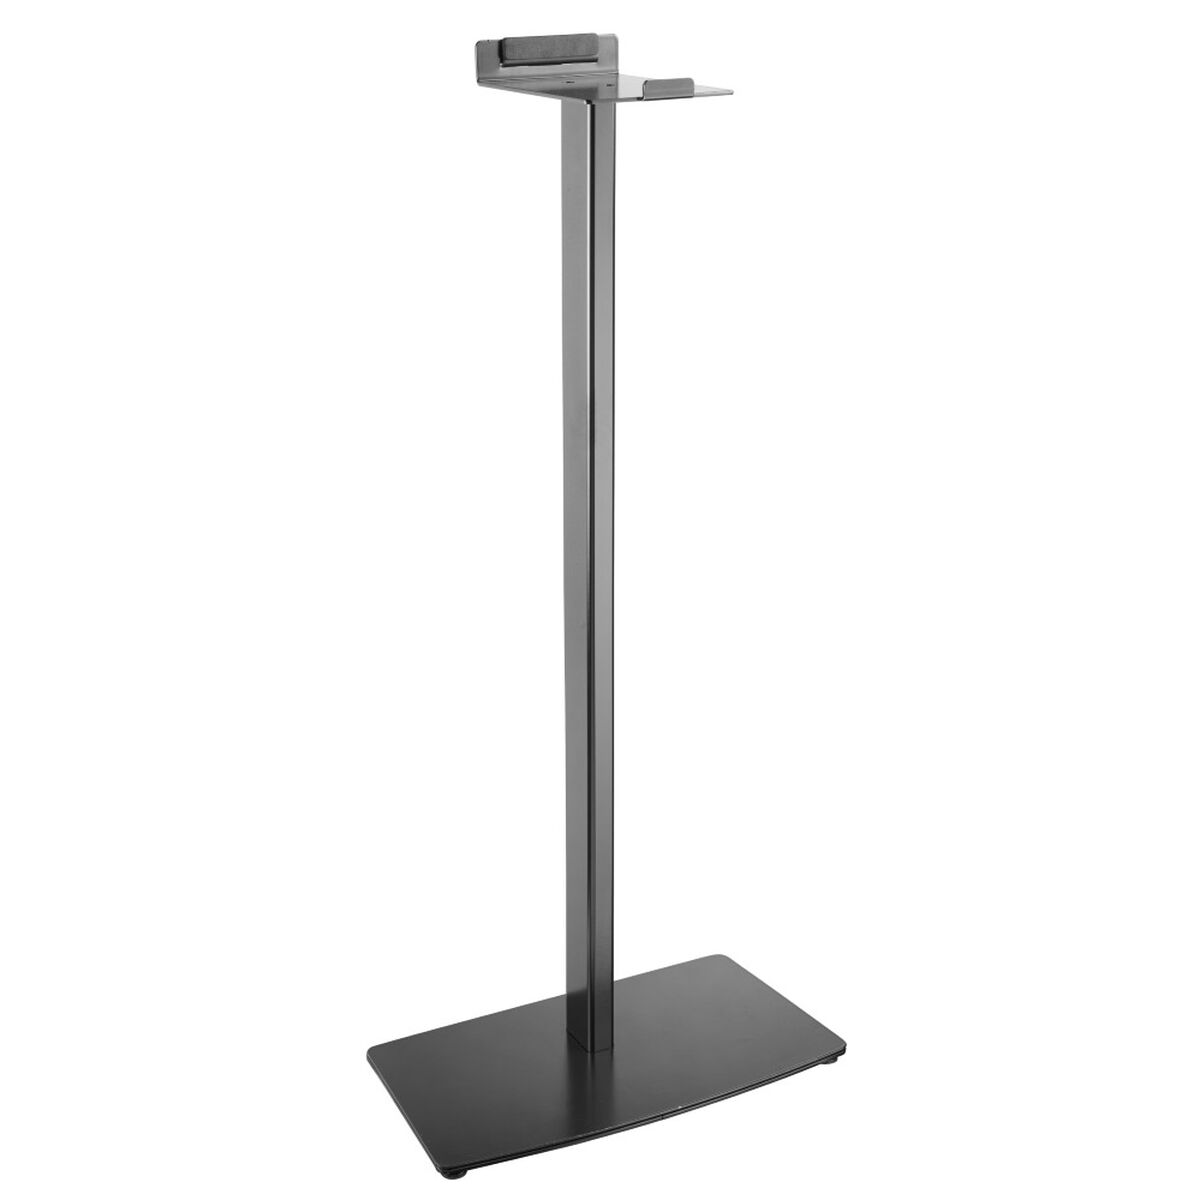 Speaker Stand Cavus Five/Play Black, Cavus, Electronics, Audio and Hi-Fi equipment, speaker-stand-cavus-five-play-black-1, Brand_Cavus, category-reference-2609, category-reference-2637, category-reference-2882, category-reference-t-19653, category-reference-t-19899, category-reference-t-21329, category-reference-t-25554, category-reference-t-7441, cinema and television, Condition_NEW, music, Price_100 - 200, RiotNook